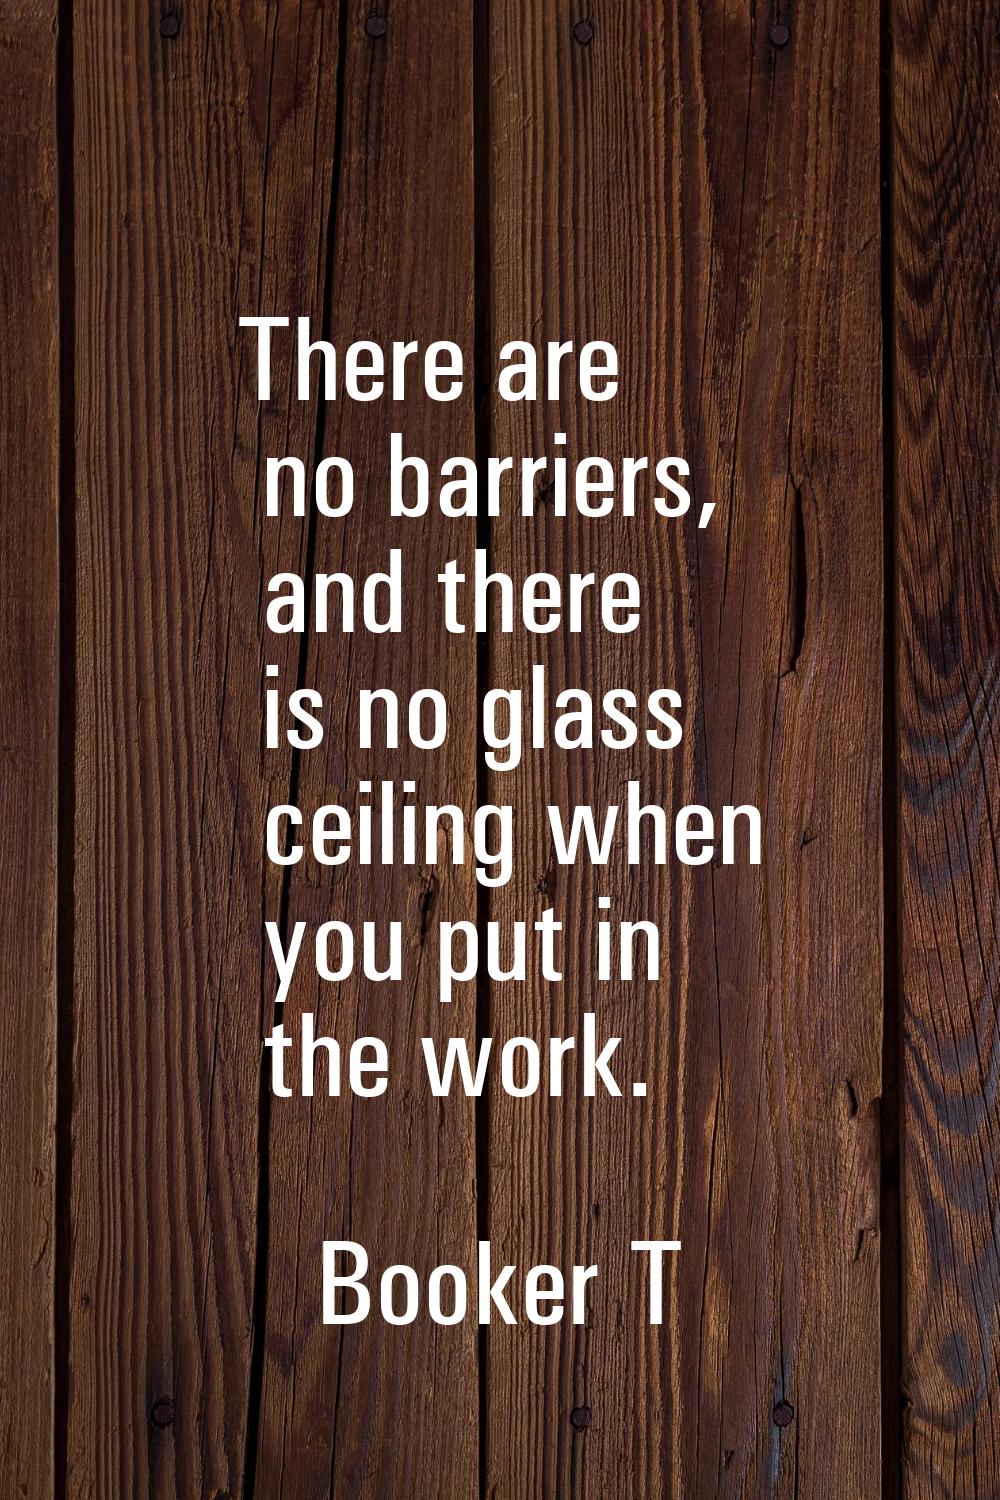 There are no barriers, and there is no glass ceiling when you put in the work.